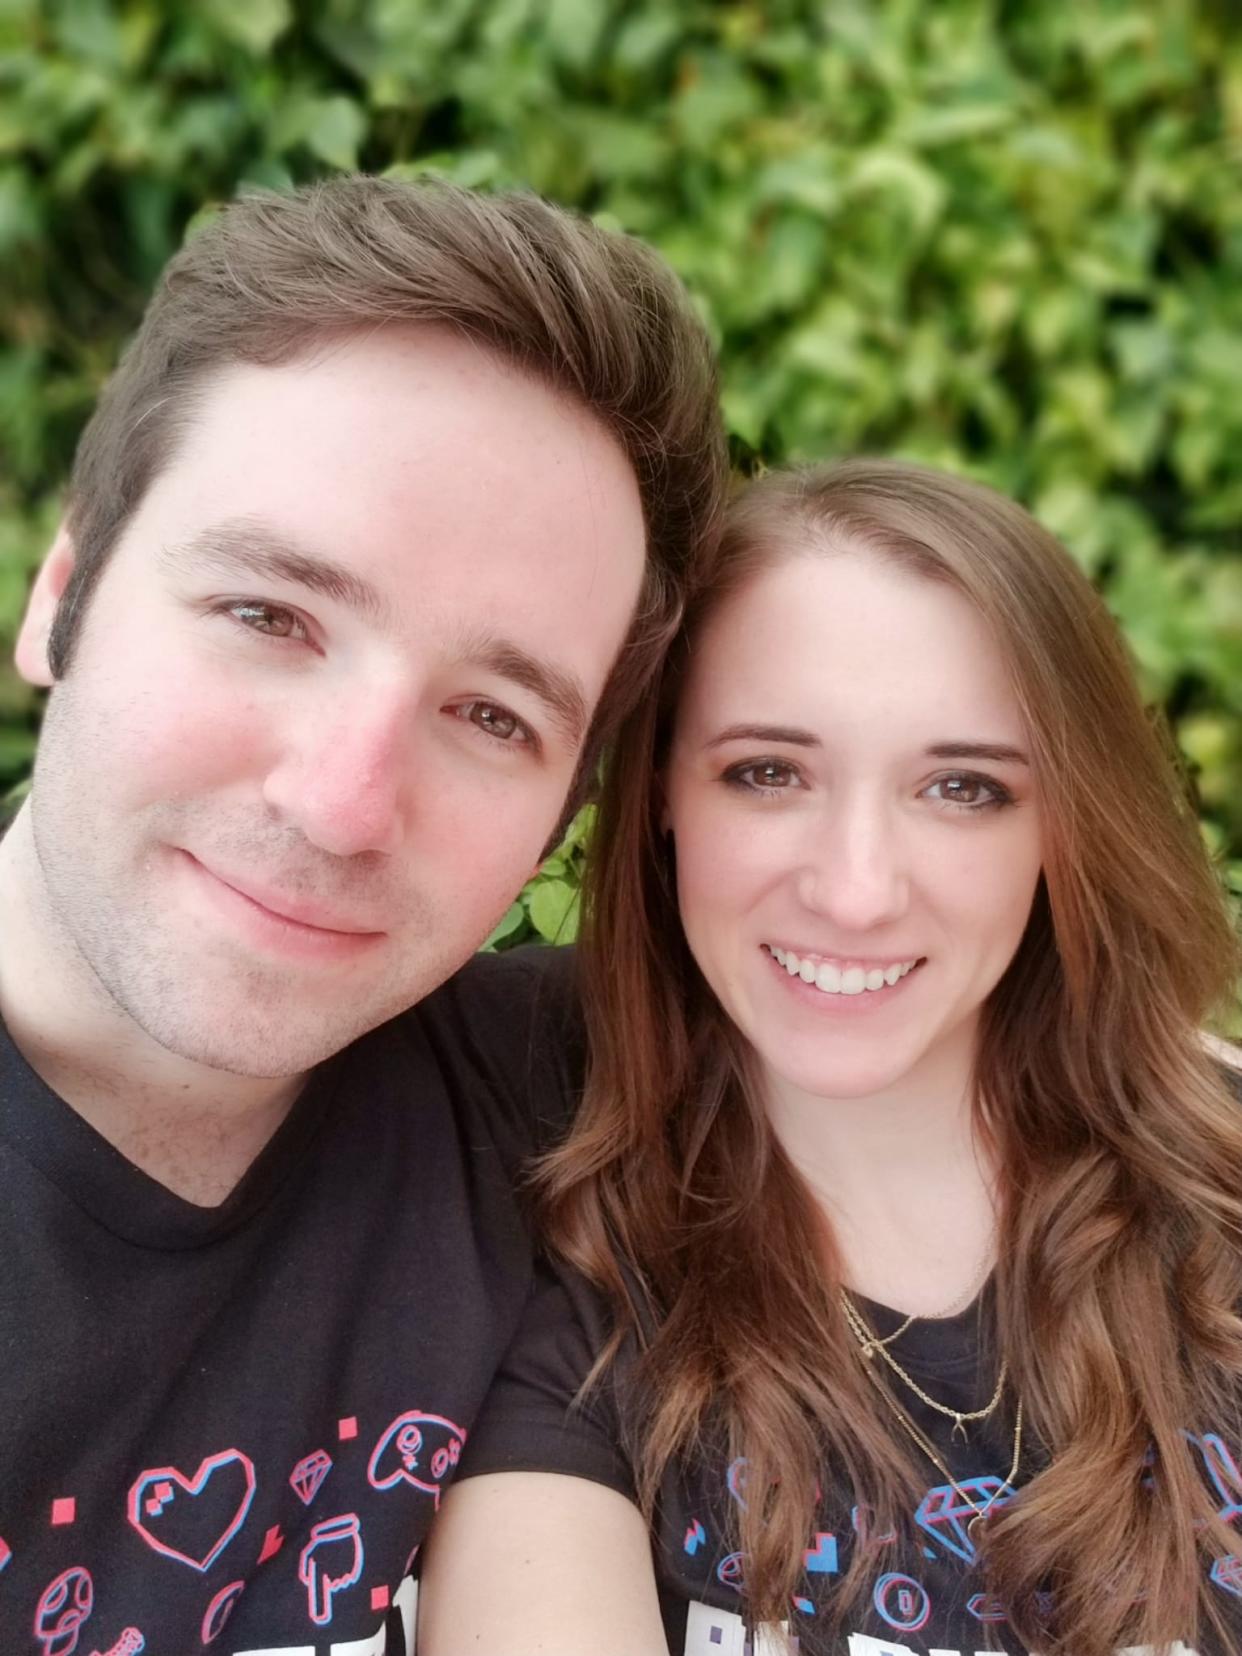 Josh Atkinson and Alexis Olson pose for a photo during a first date at Disney World in February 2019.